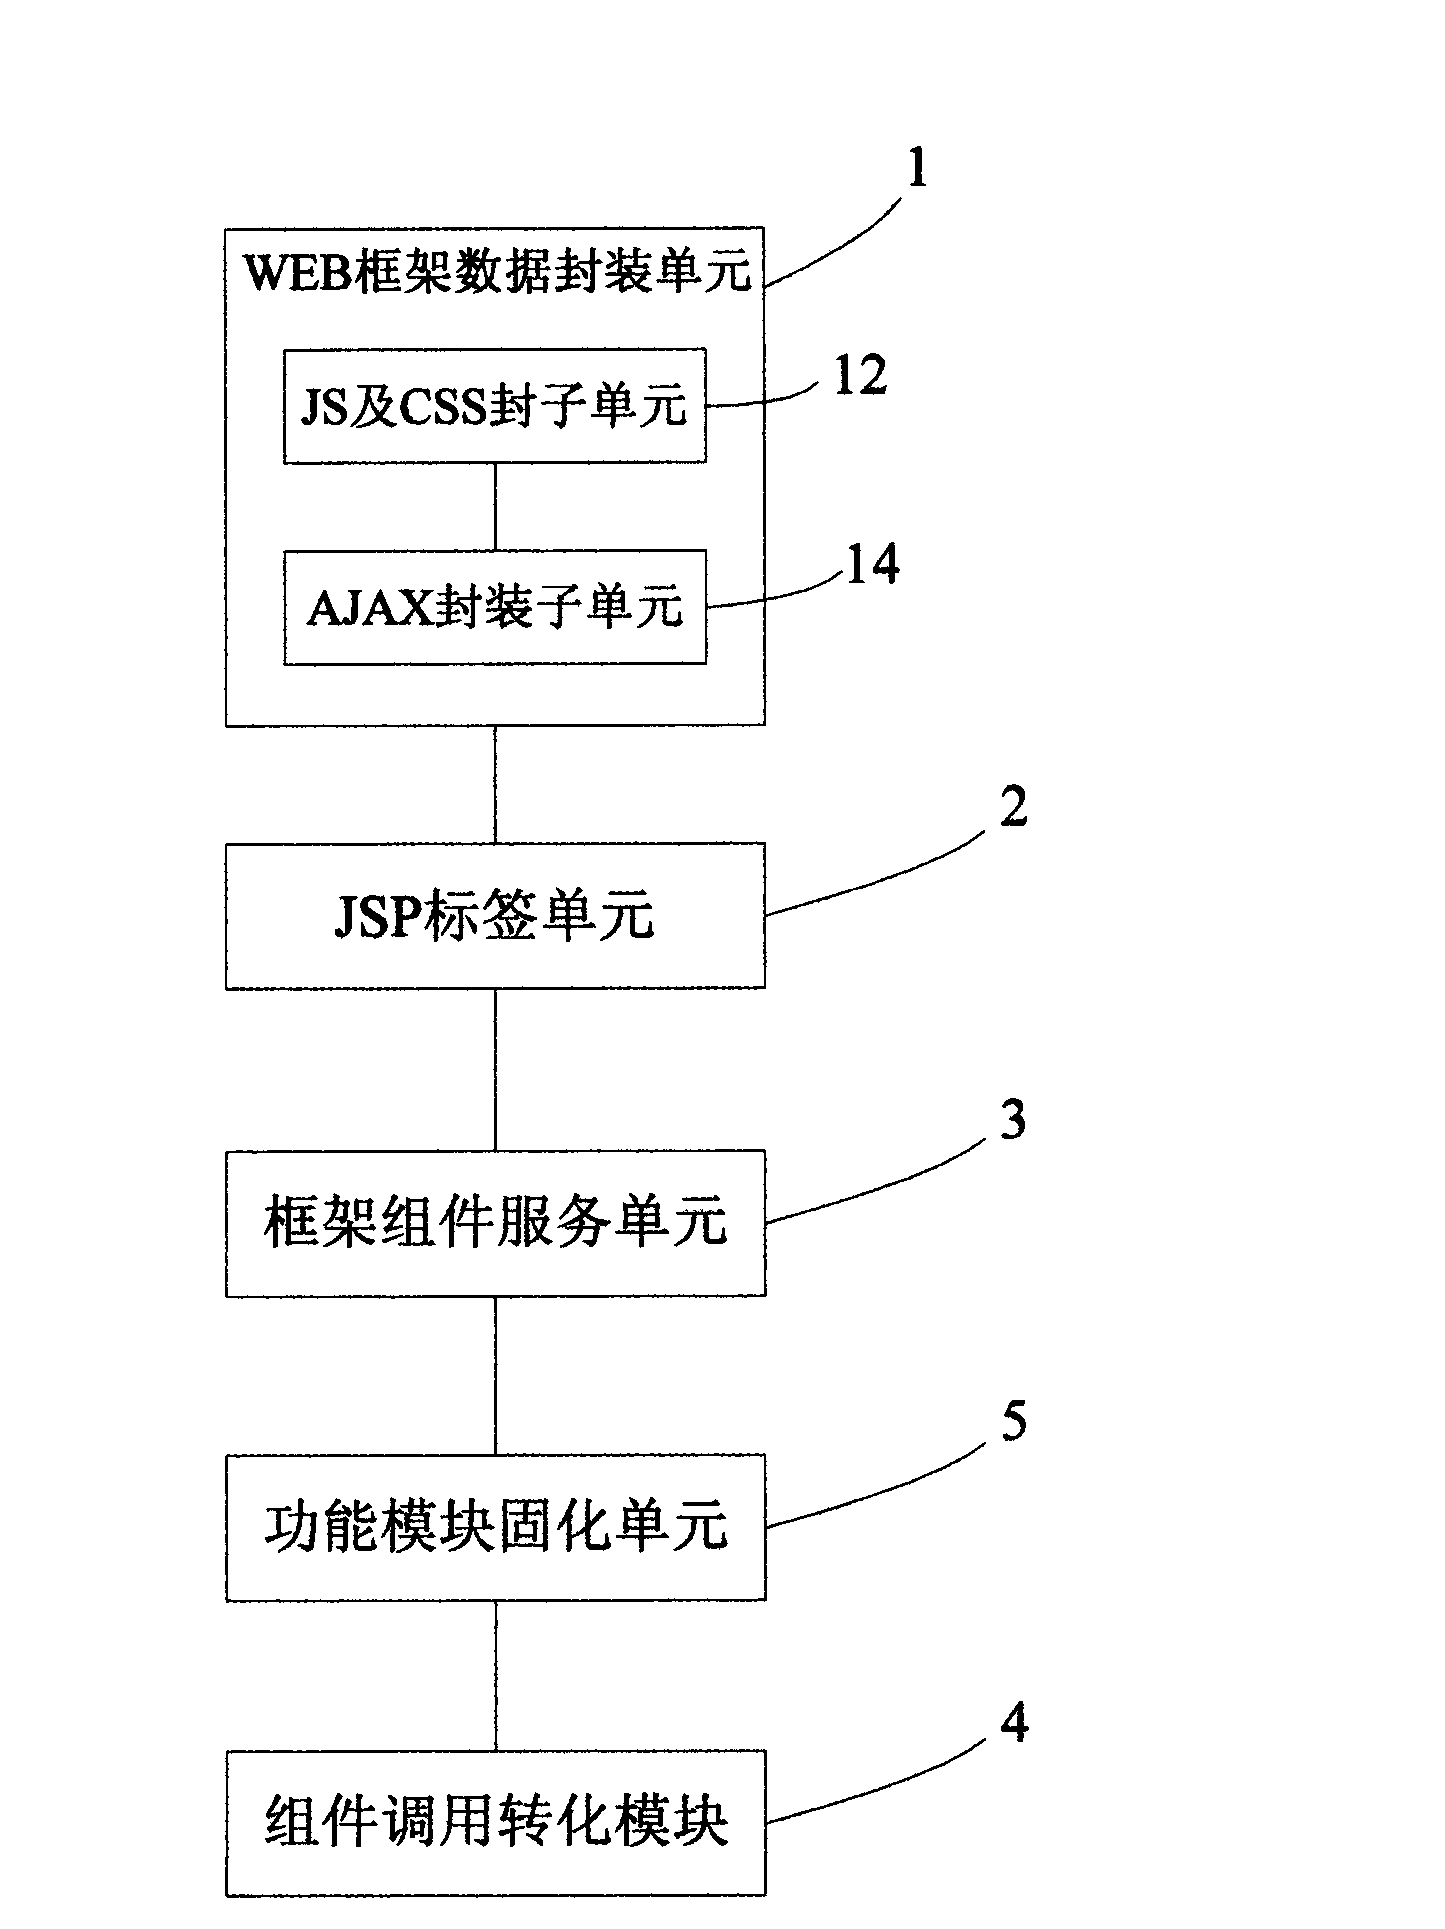 Reuse framework generating method, device and application system based on J2EE distributed architecture